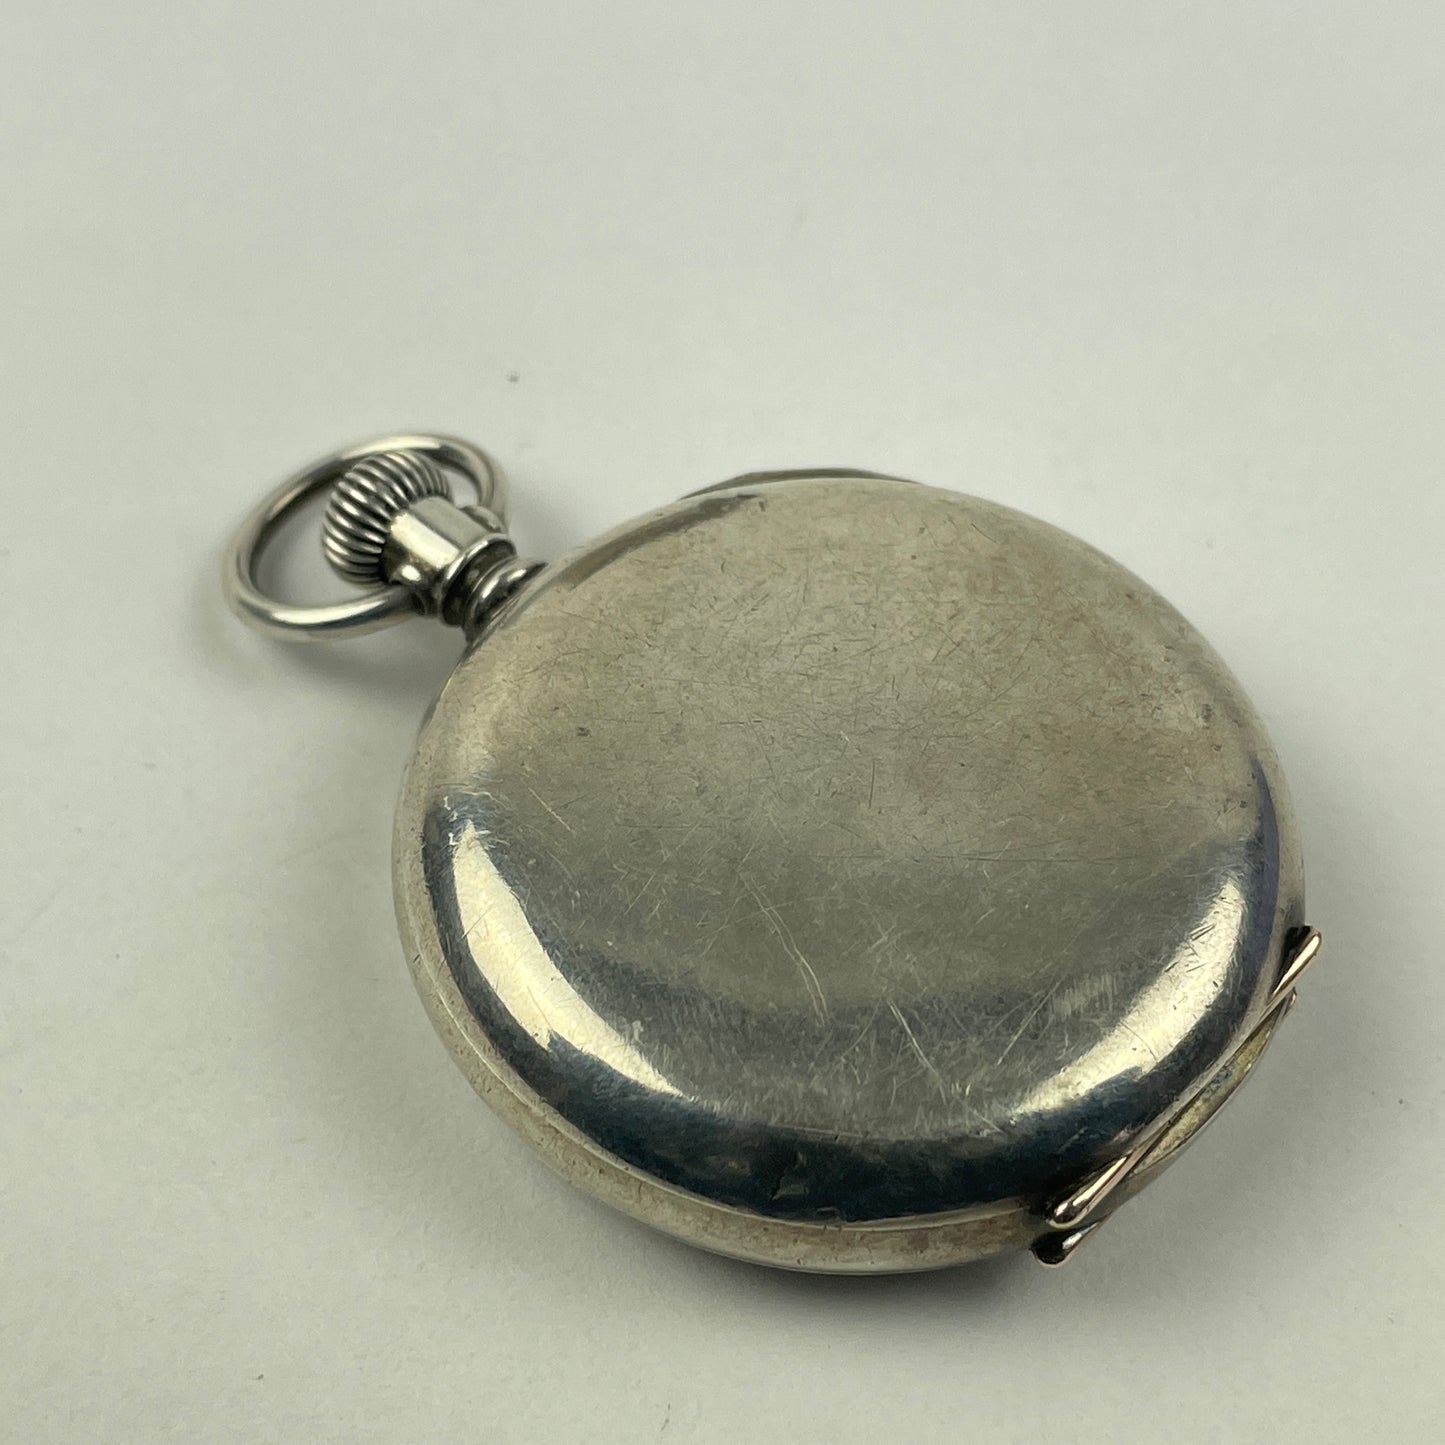 Apr Lot 67- Waltham “O” Size Coin Silver Hunting Pocket Watch